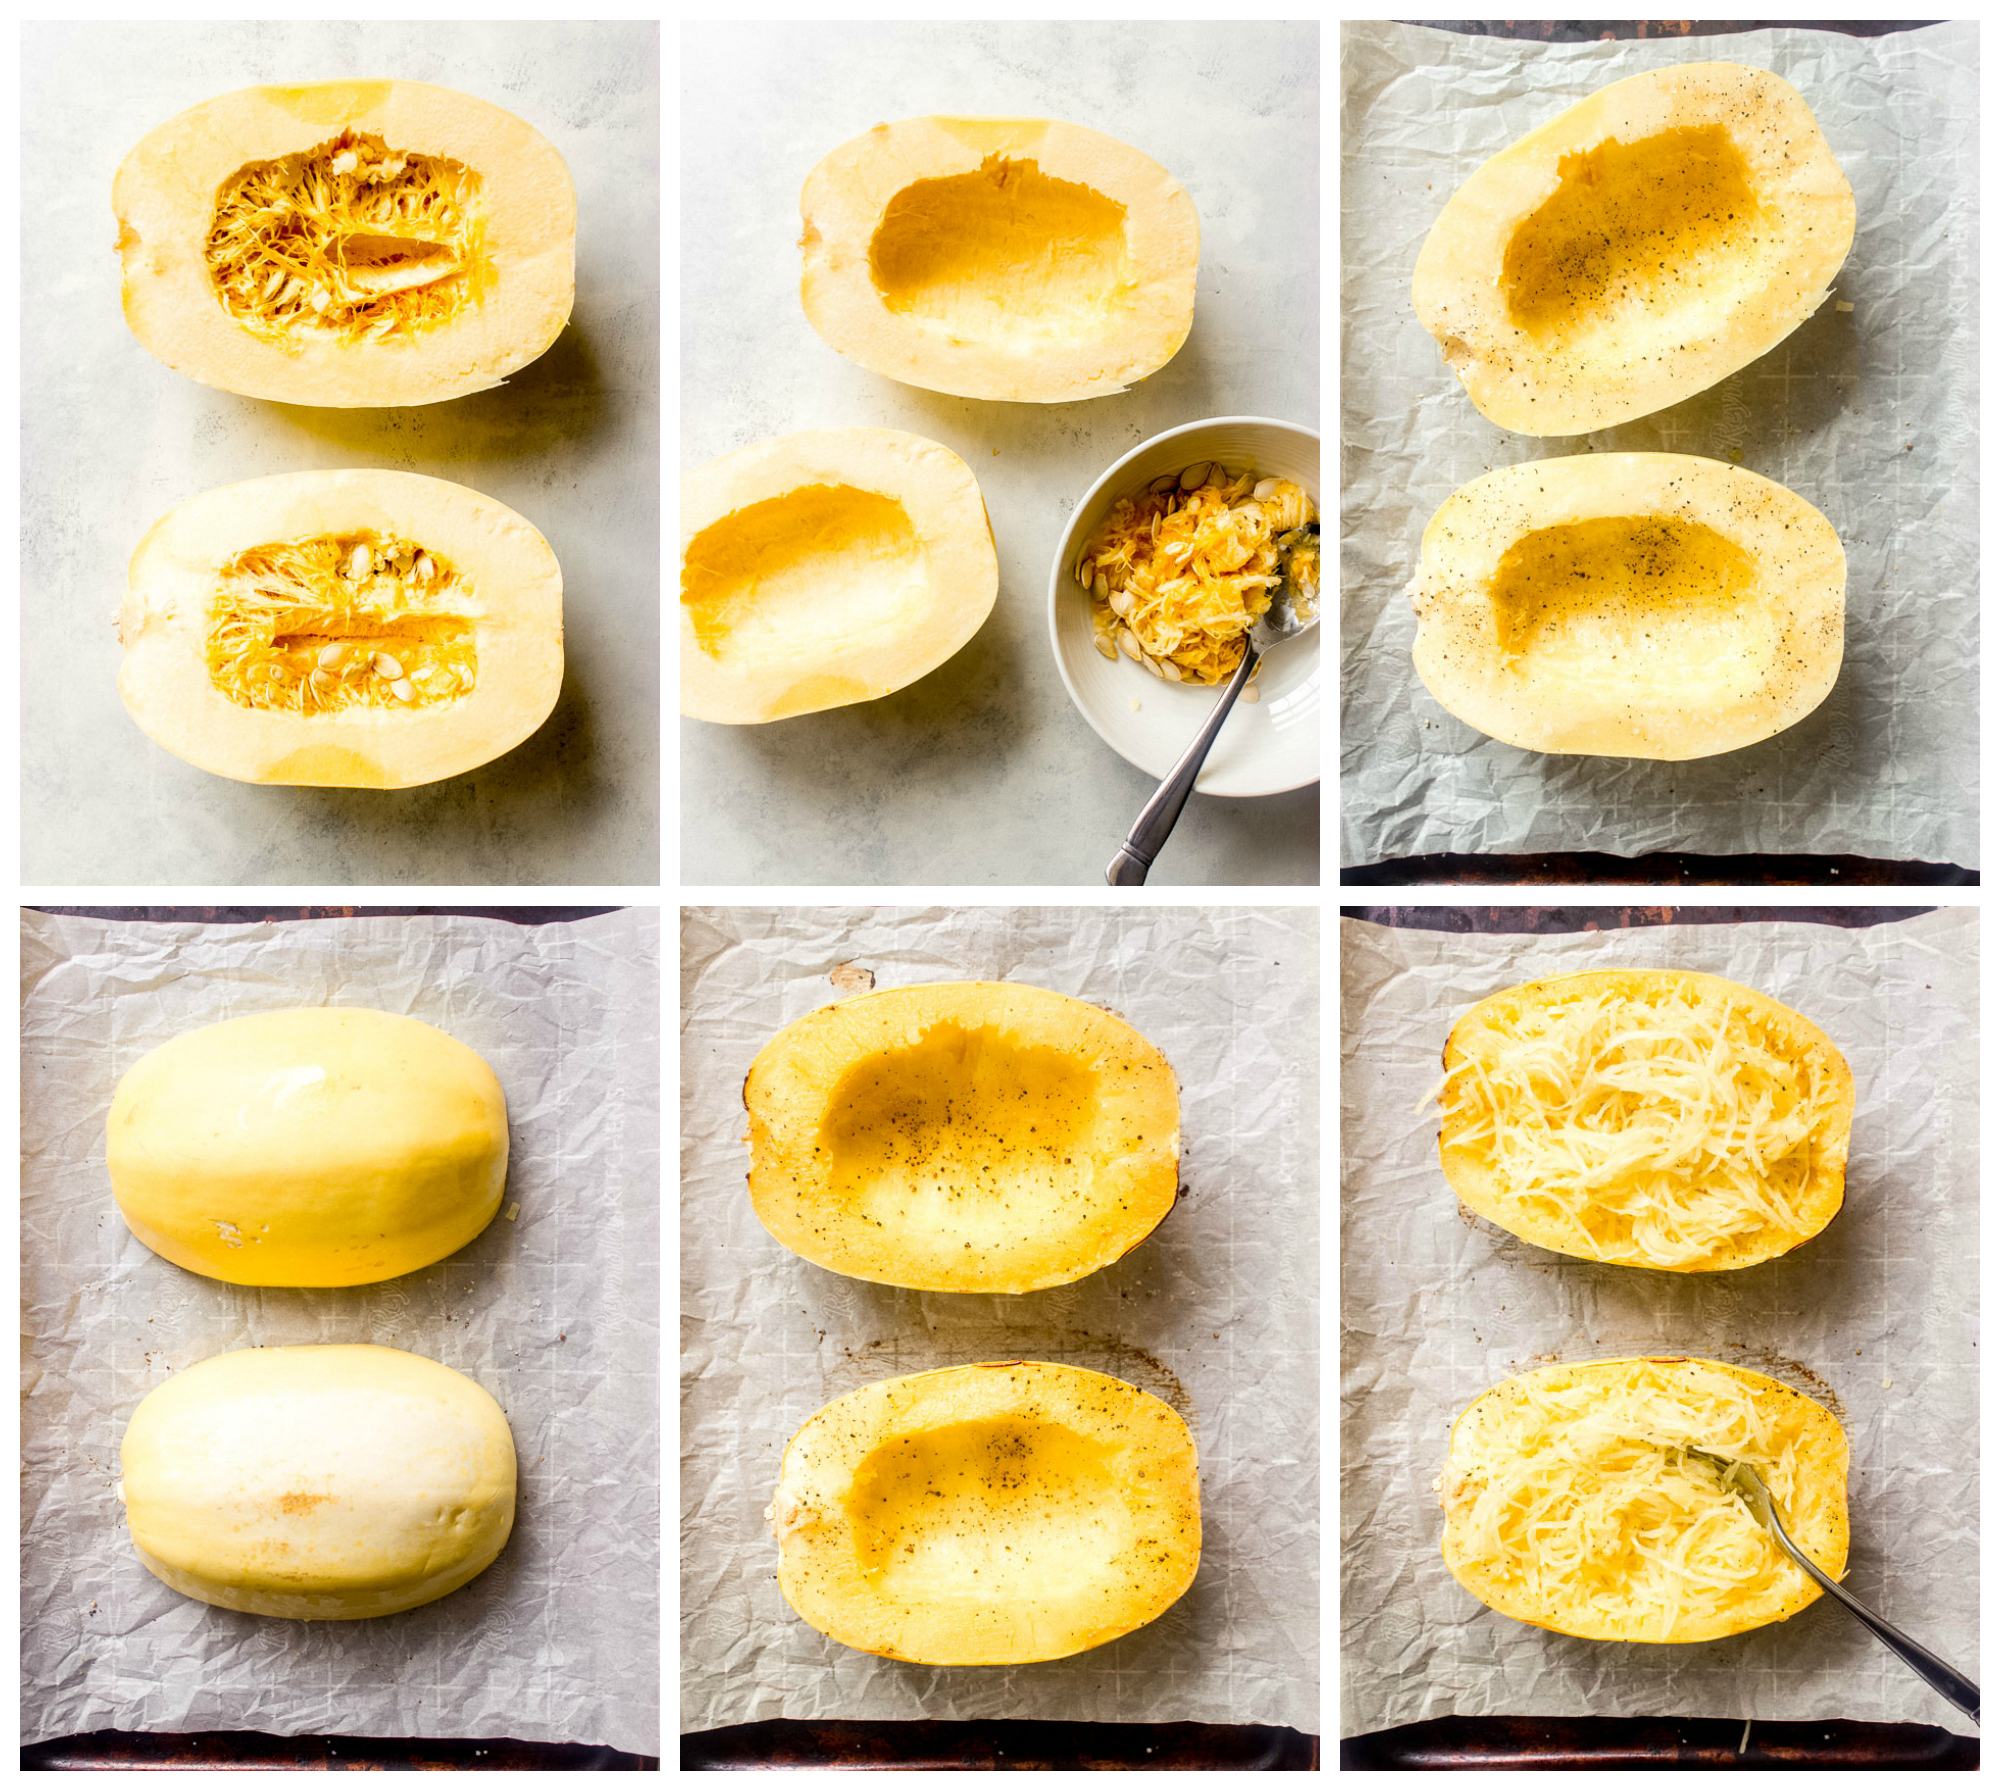 Step by step on how to cook spaghetti squash in oven cut in half